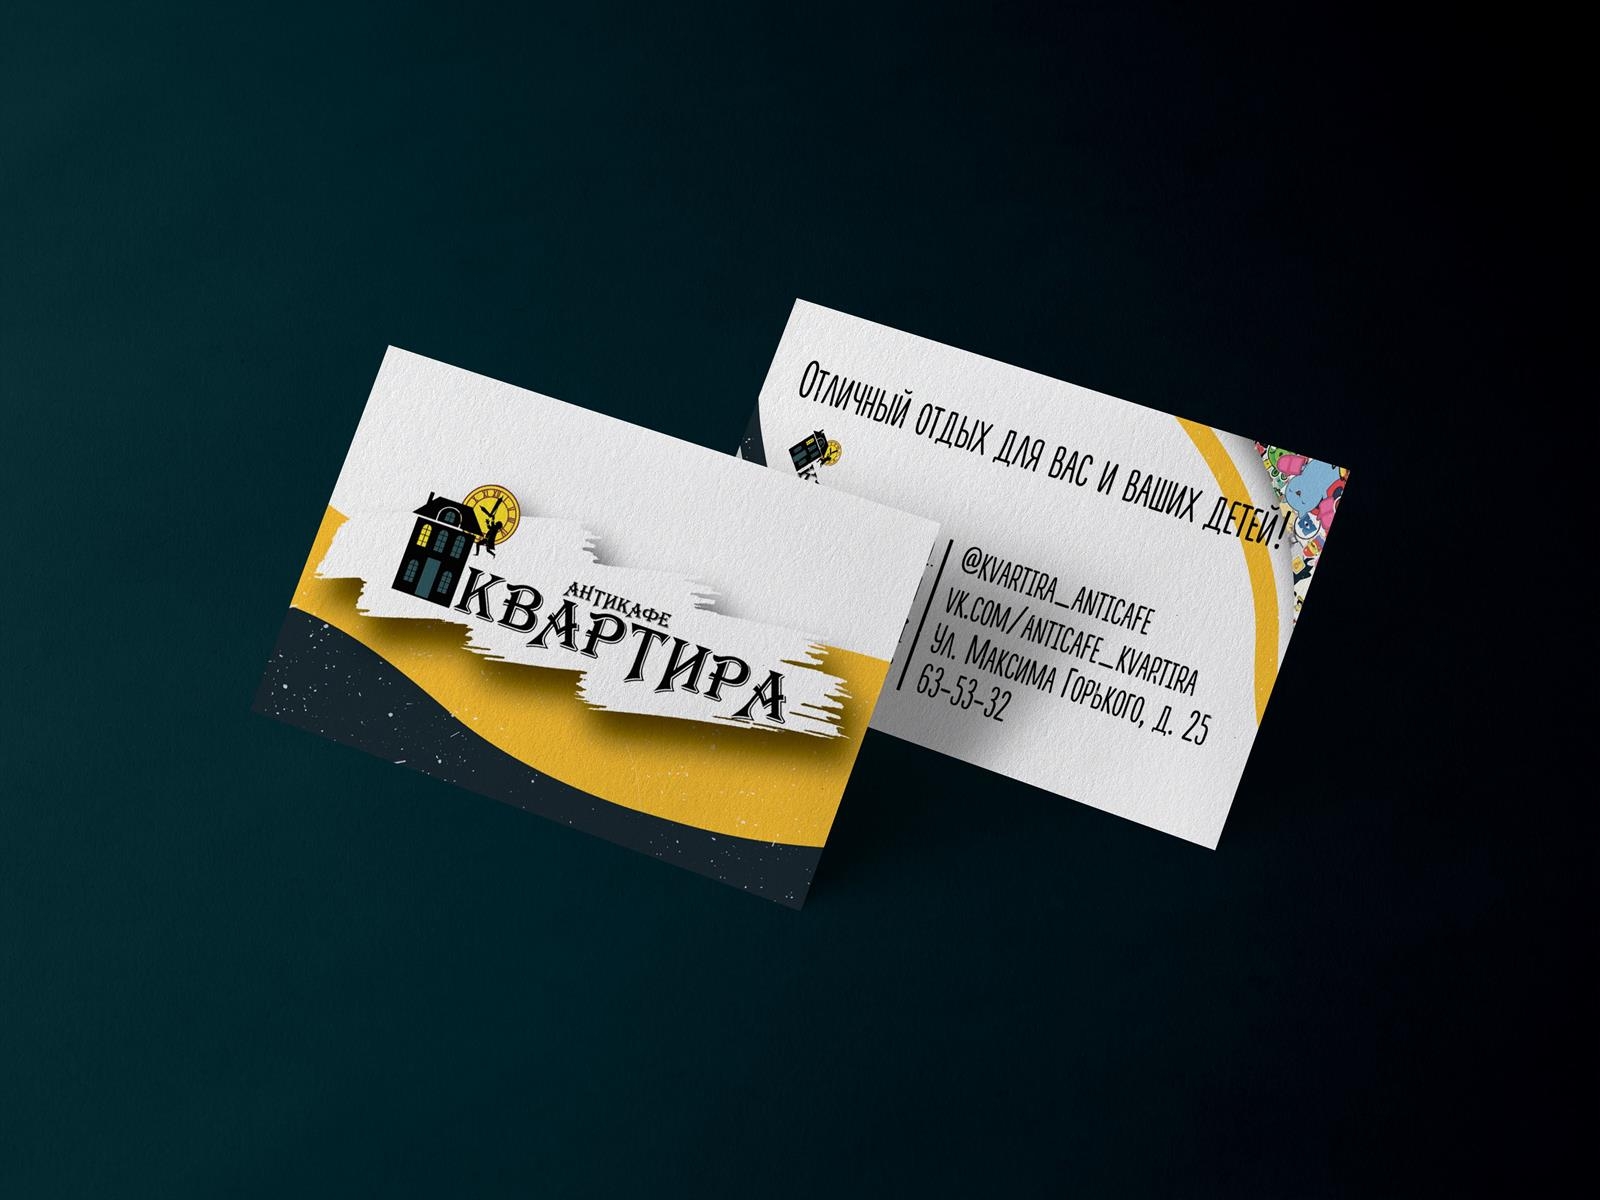 A business card for anti-cafe branding branding identity business card design graphic design